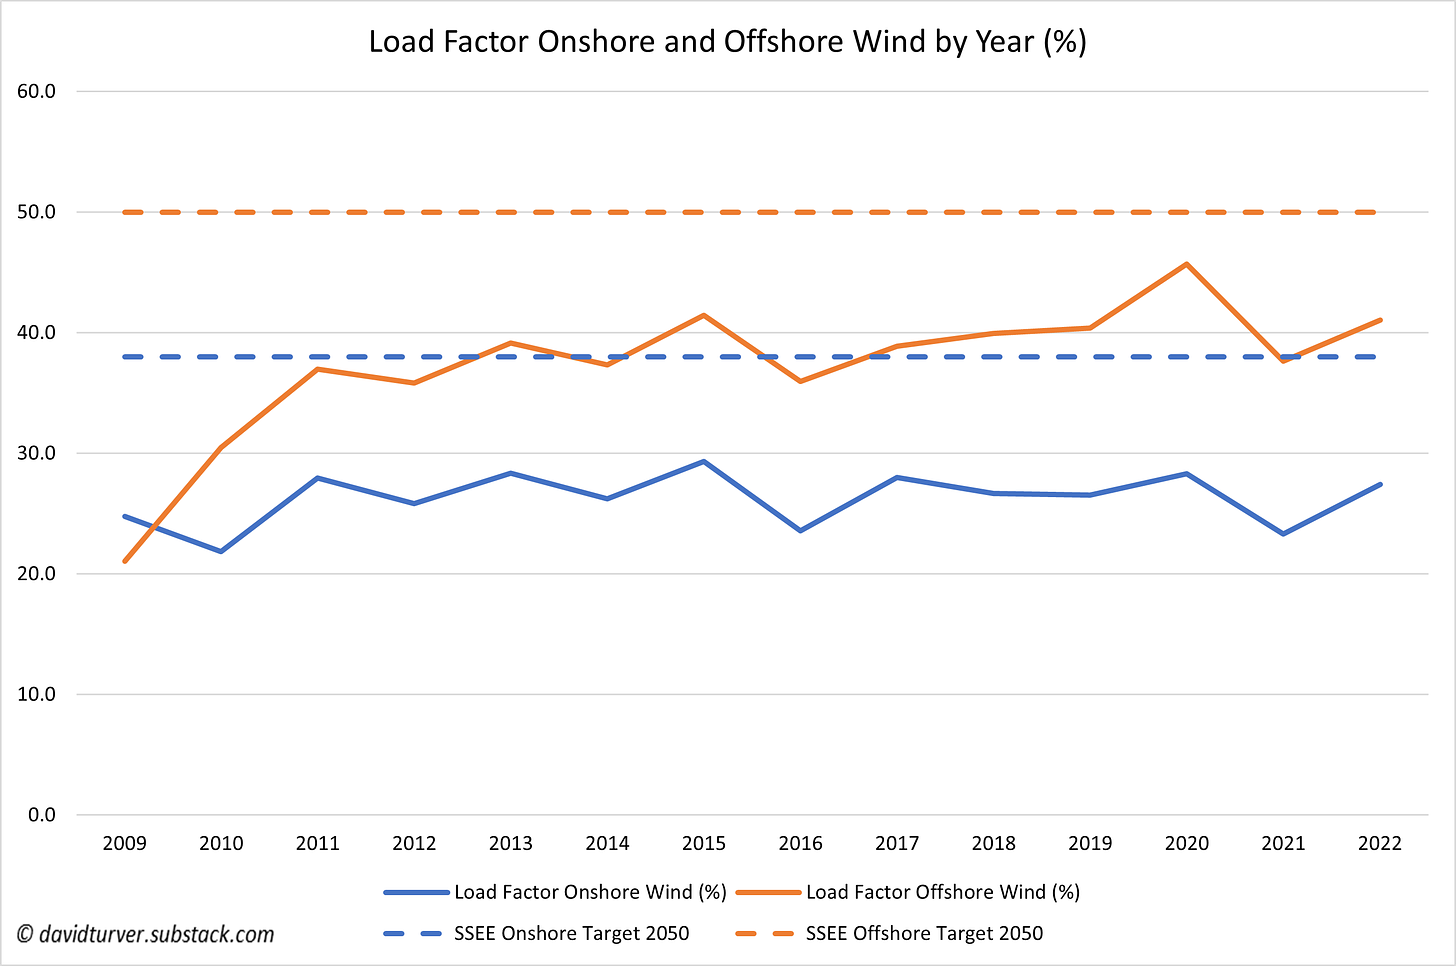 Figure 3 - Load Factor Onshore and Offshore Wind